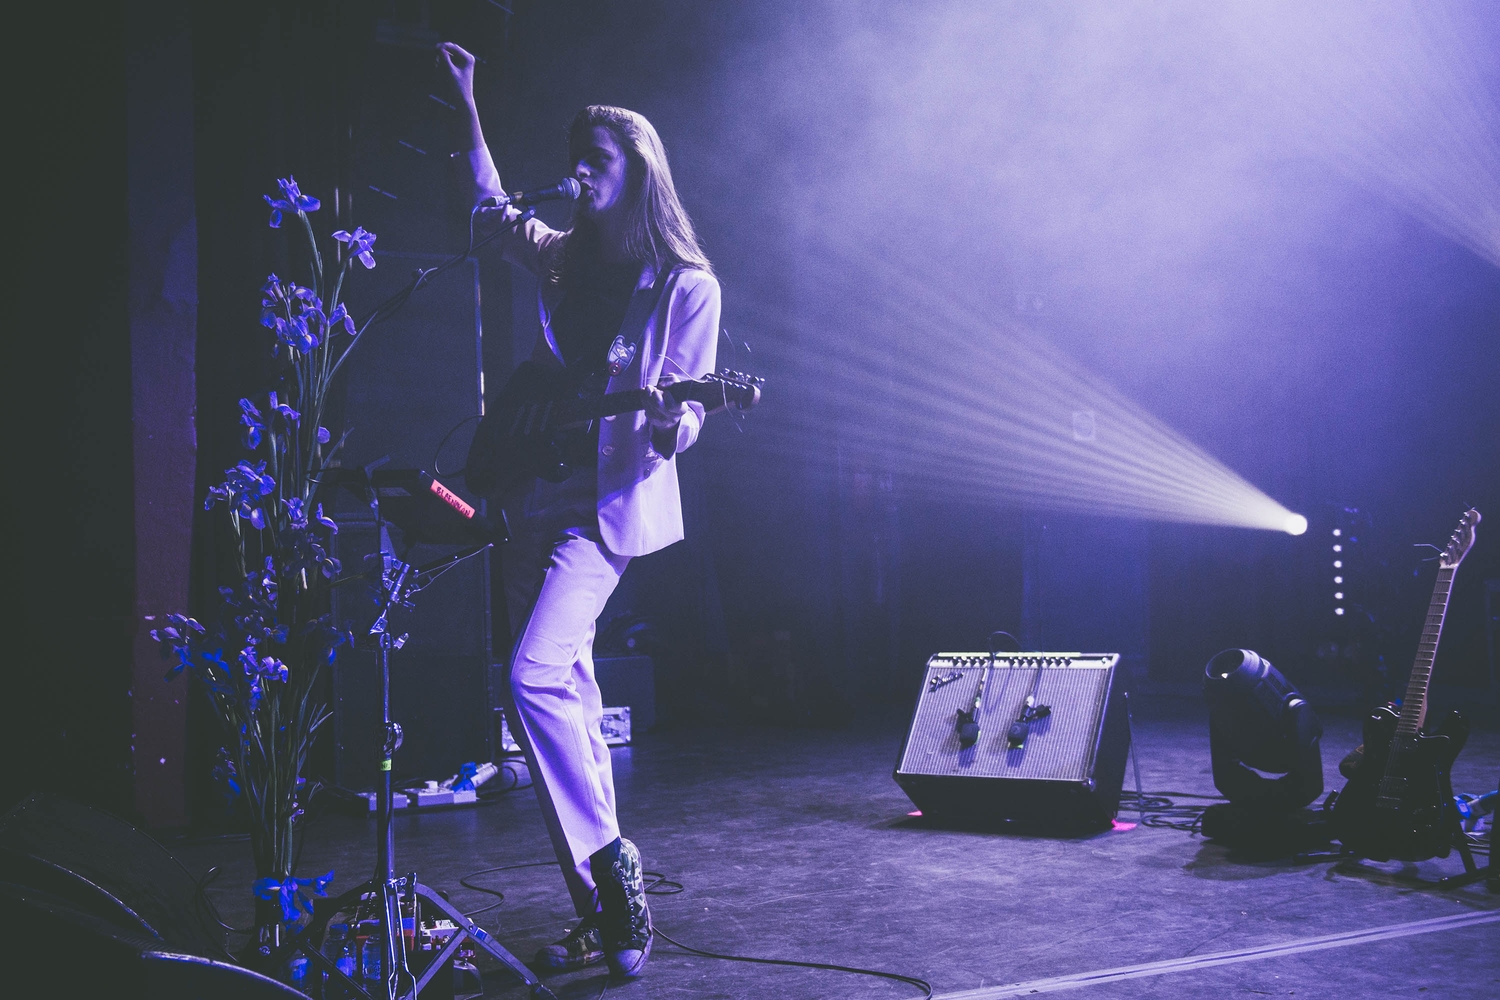 Blaenavon announce last minute show at London’s Omeara